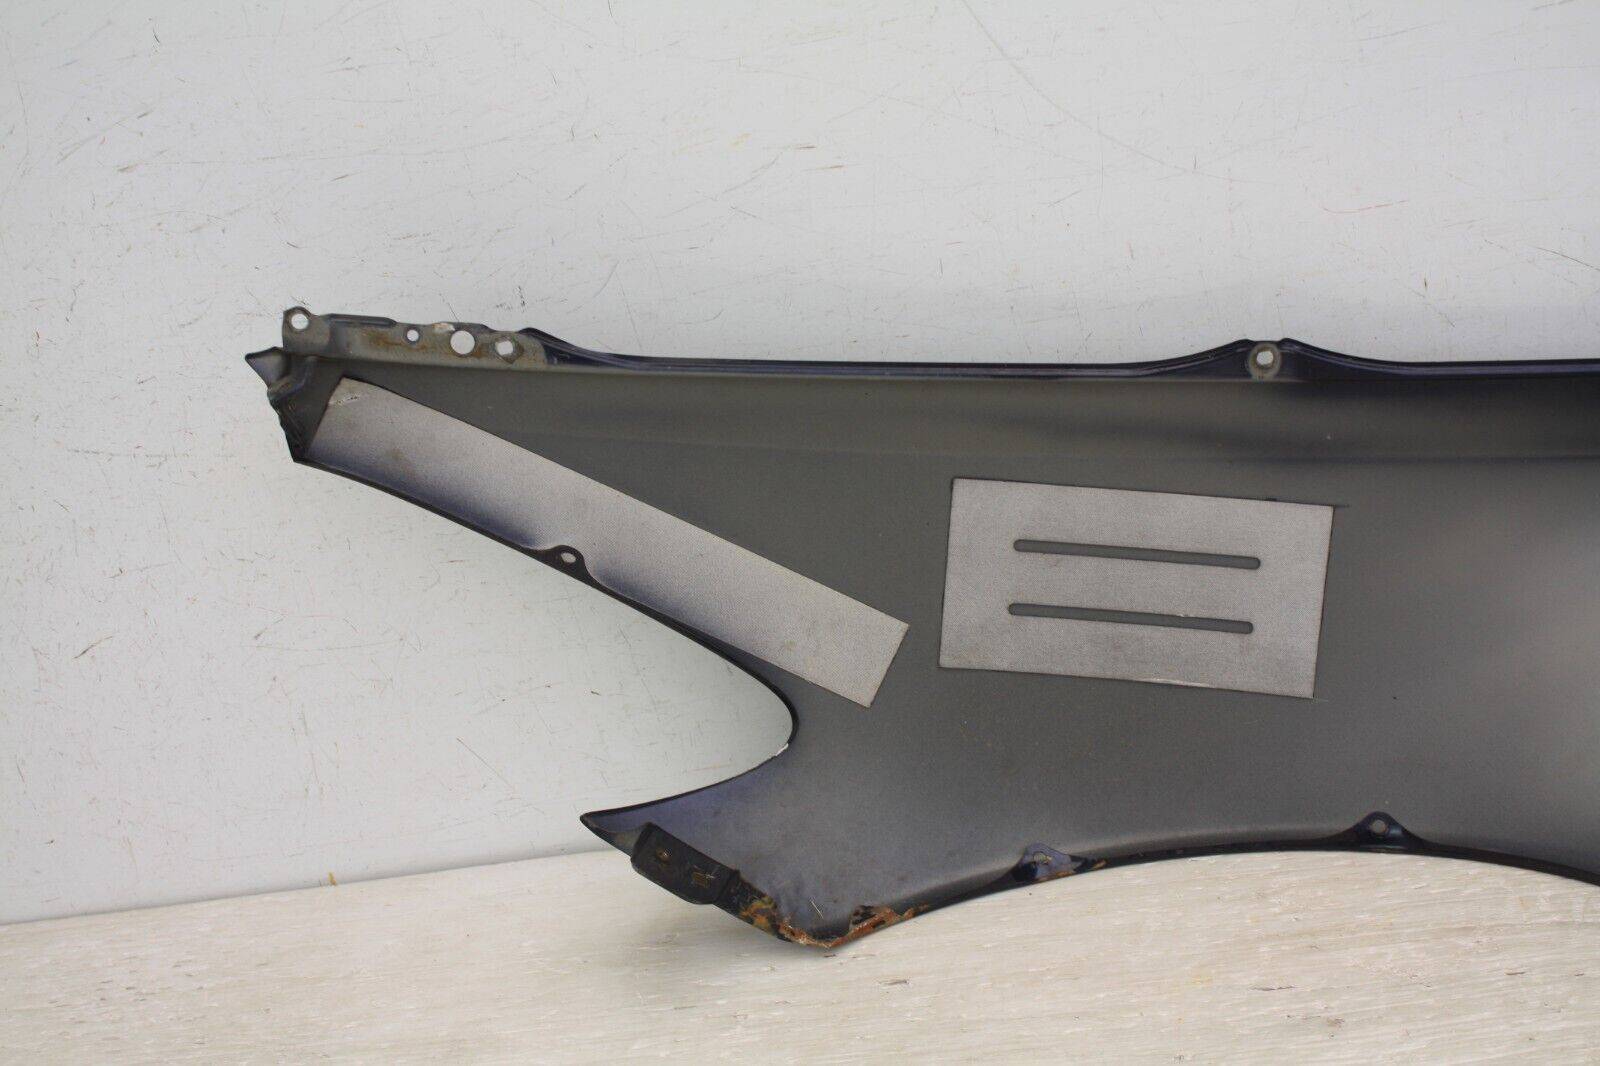 Honda-S2000-Right-Side-Wing-2000-to-2009-Genuine-SEE-PICS-176403905167-12